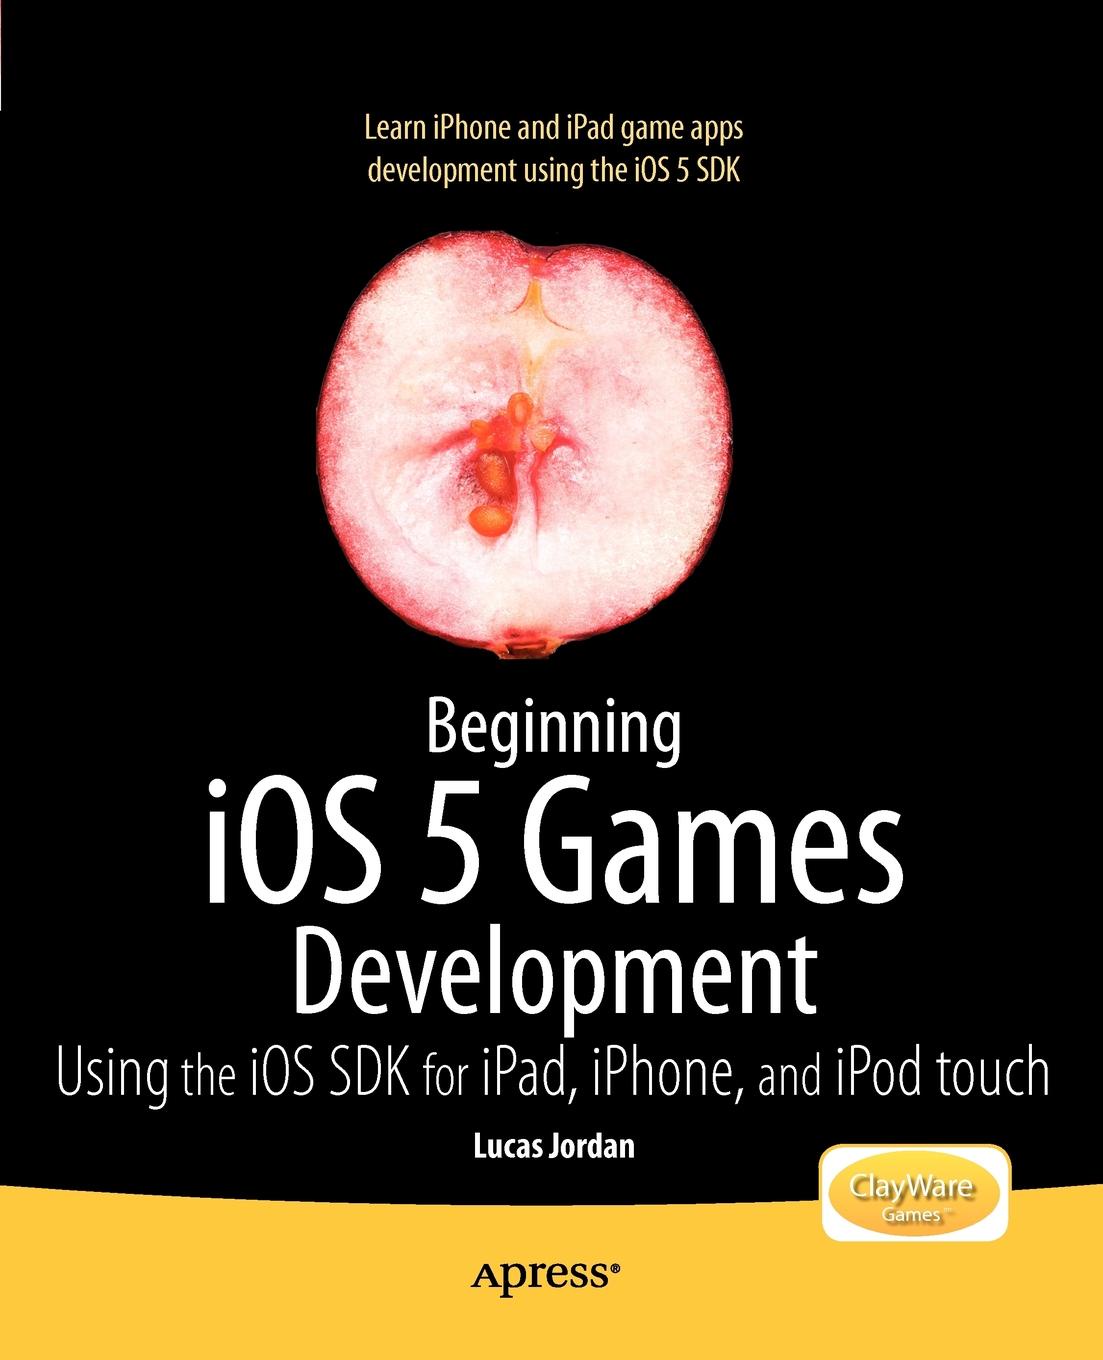 Beginning IOS 5 Games Development. Using the IOS SDK for iPad, iPhone and iPod Touch